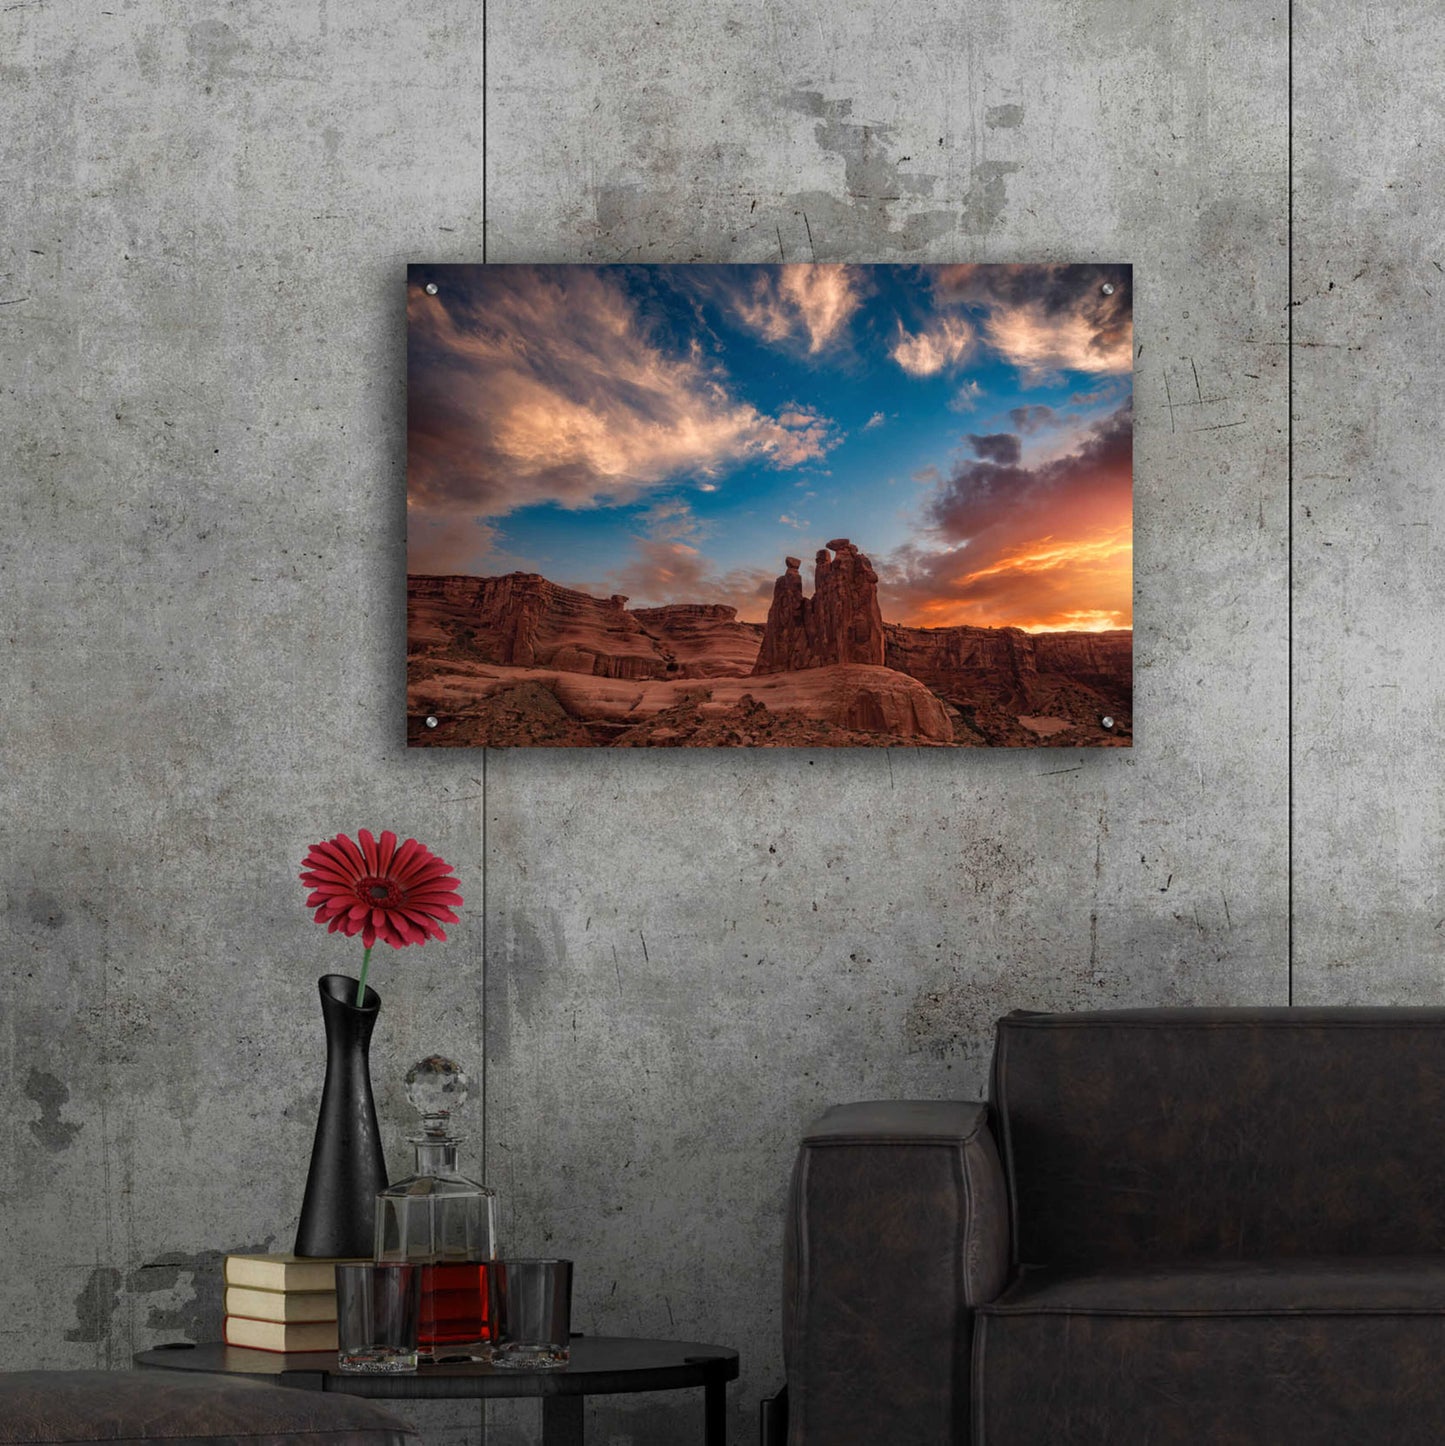 Epic Art 'Glowing Gossips - Arches National Park' by Darren White, Acrylic Glass Wall Art,36x24